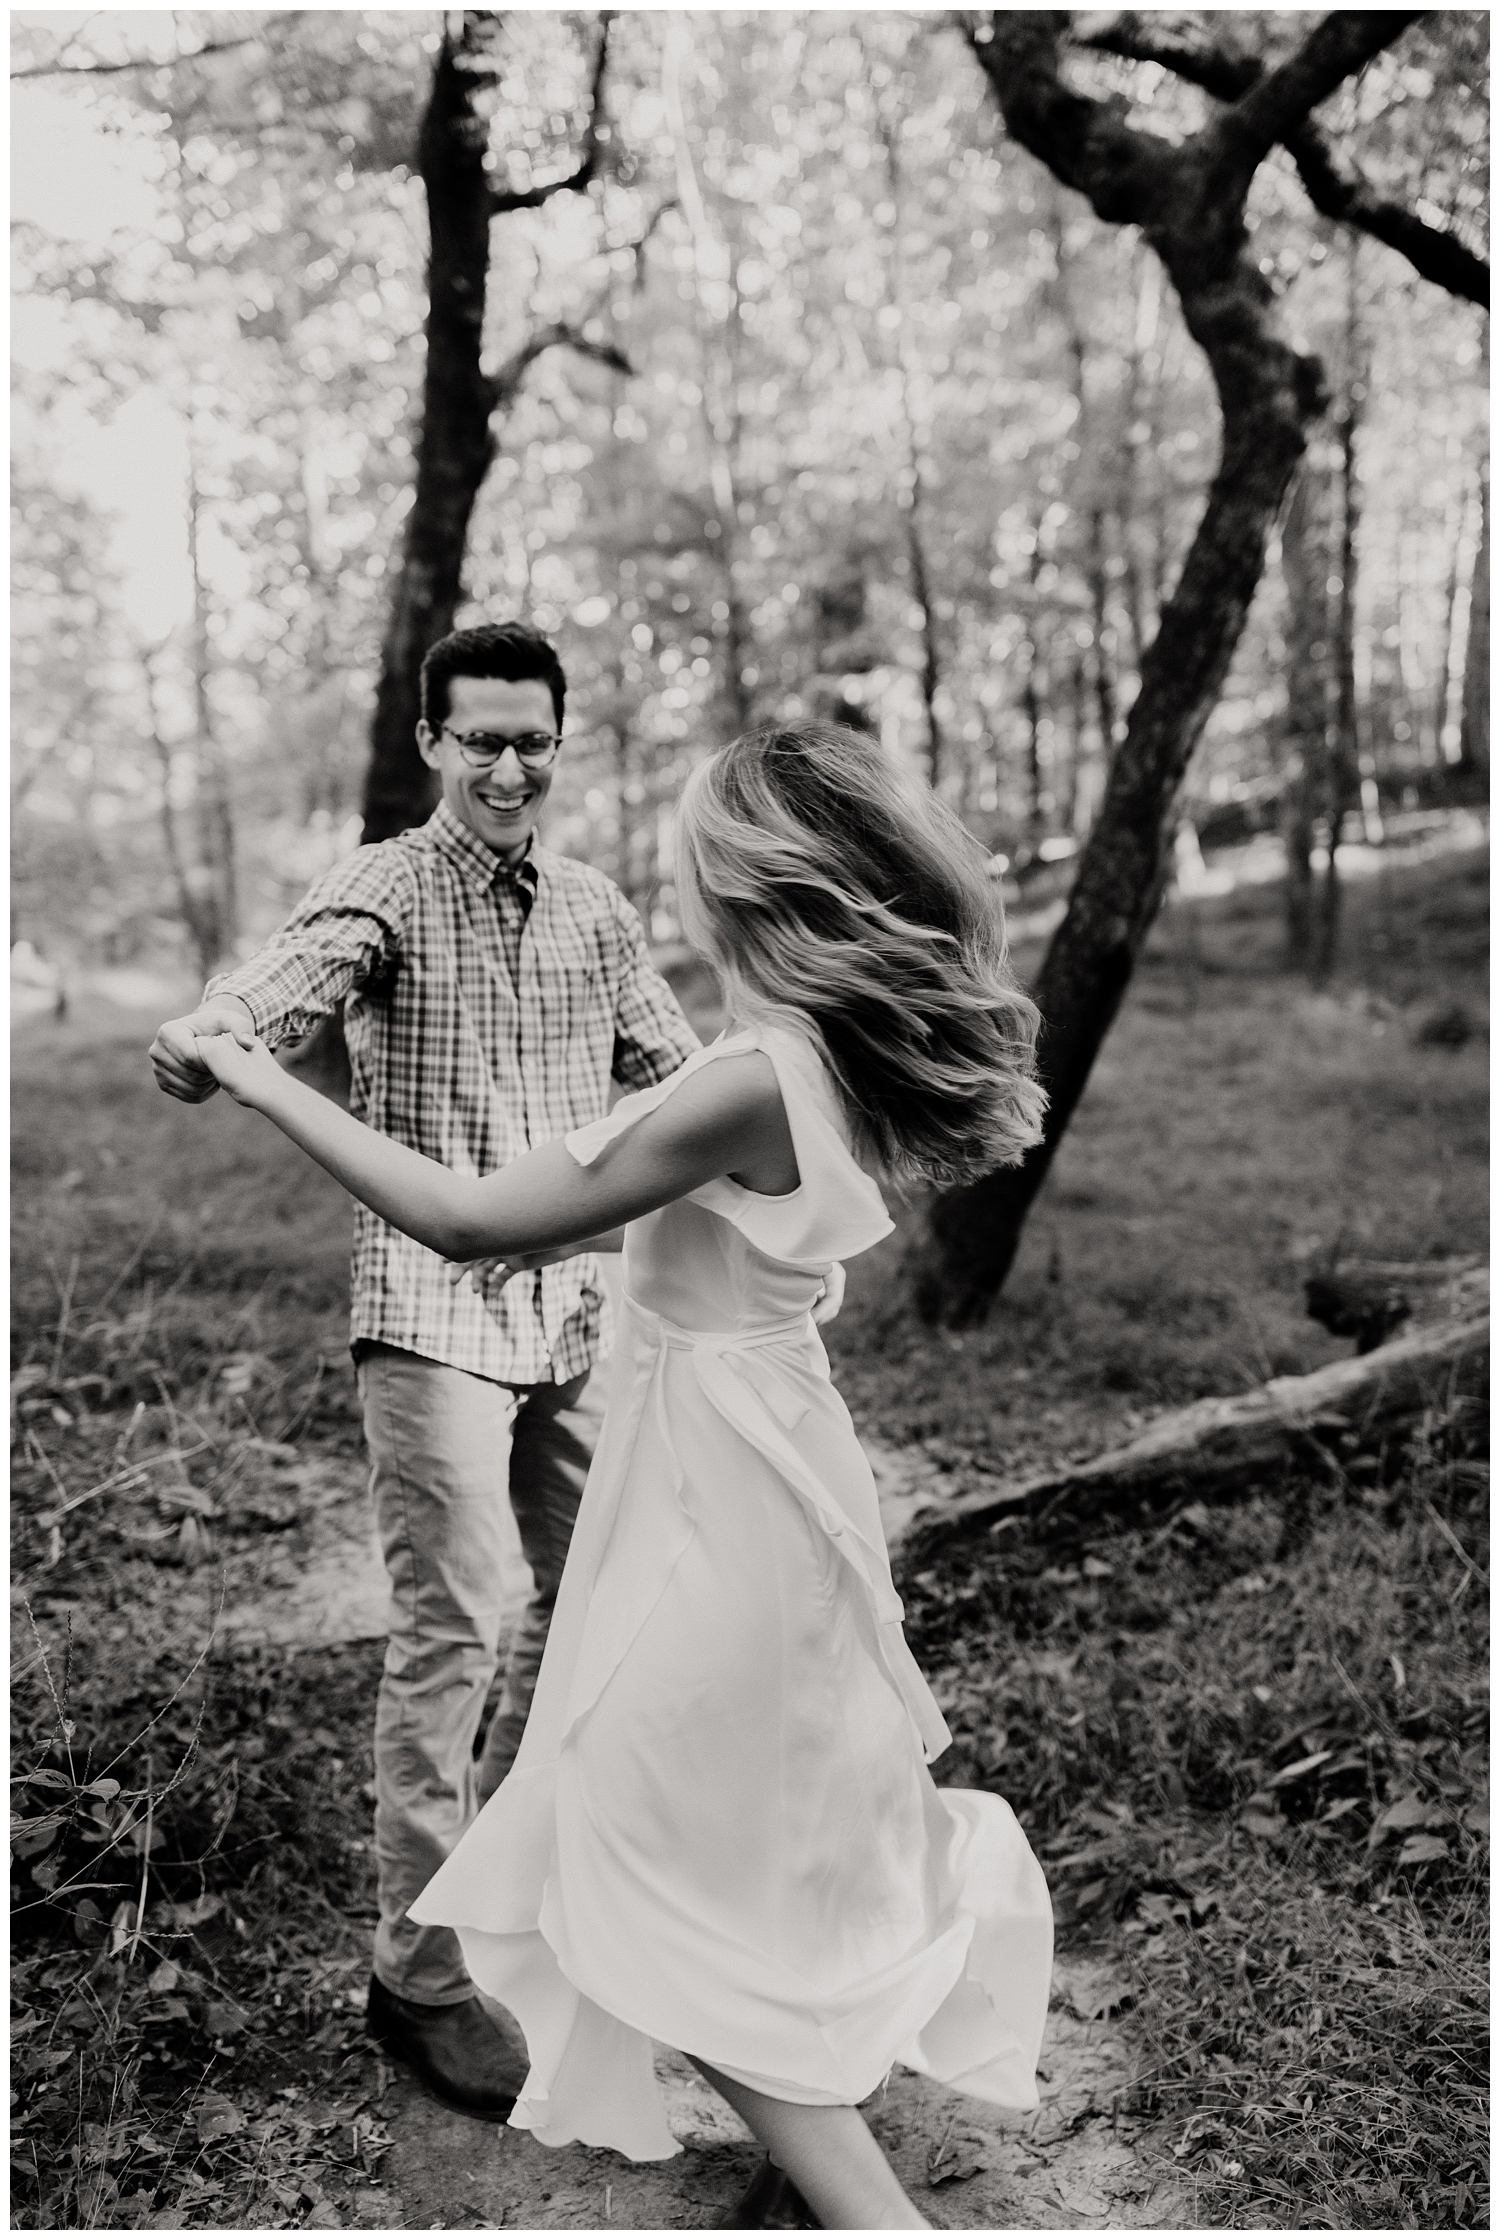 Newly engaged couple in Lullwater Park dancing during an engagement session in a lush, green forest in Atlanta, GA